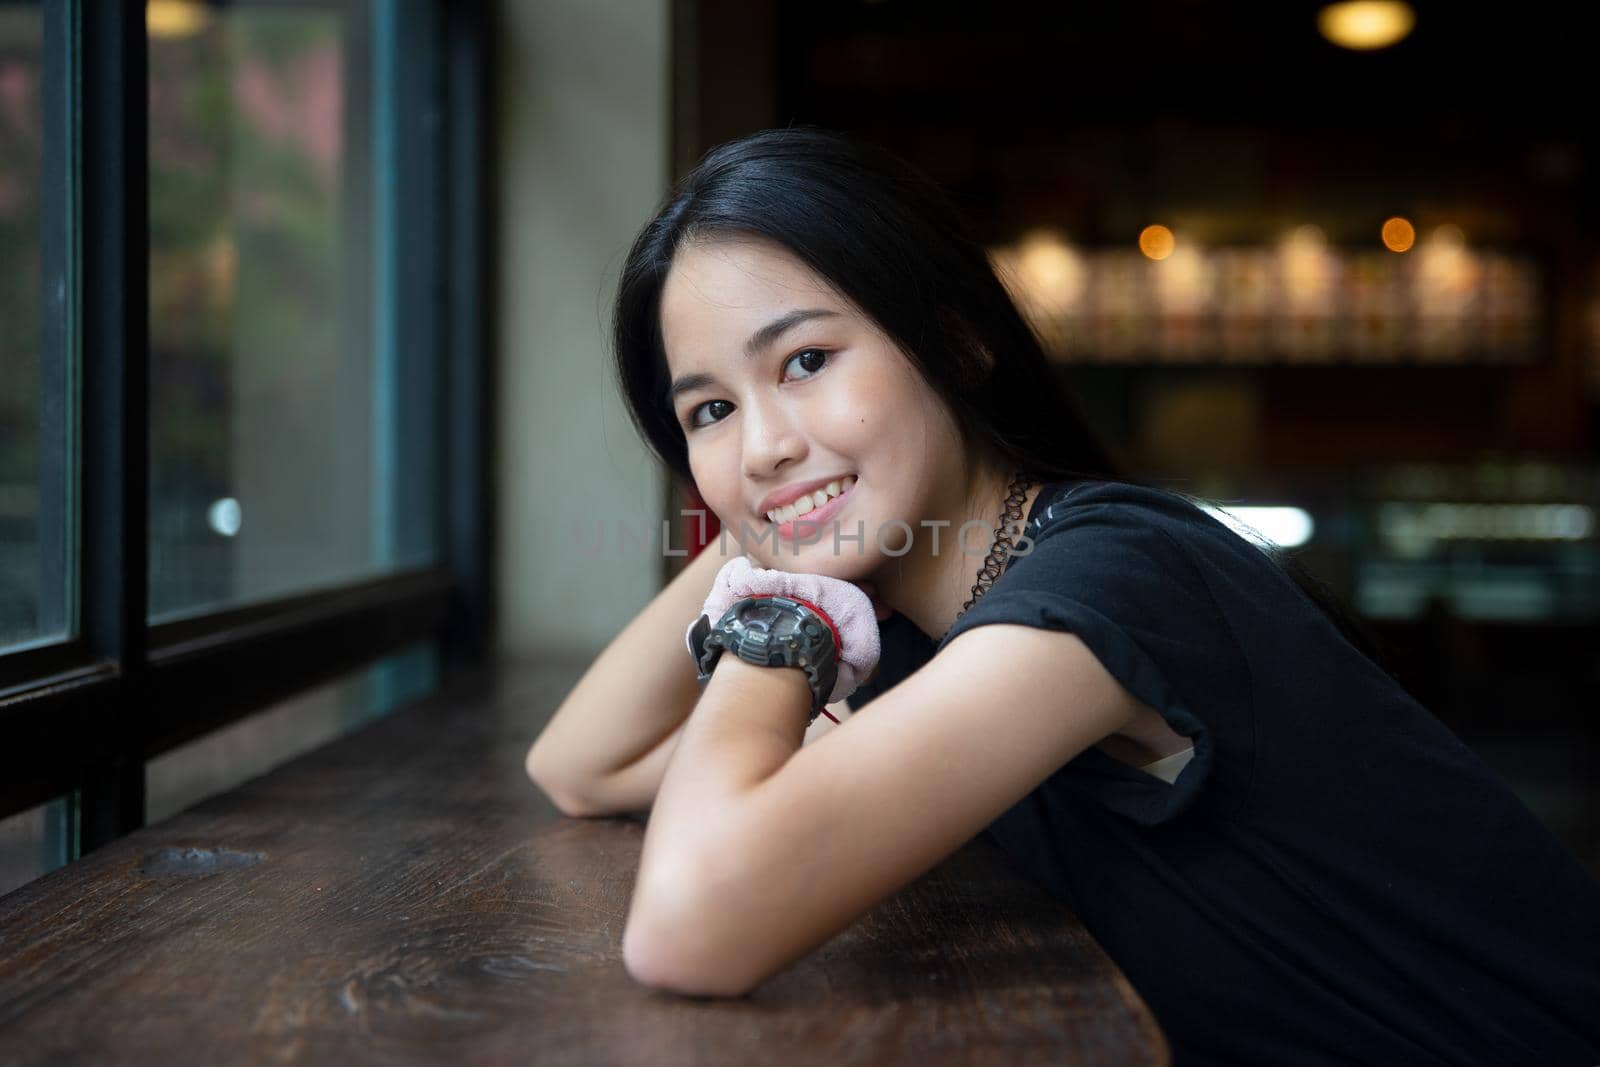 portrait of young charming beautiful girl  with smile, authentic moments of real emotion.